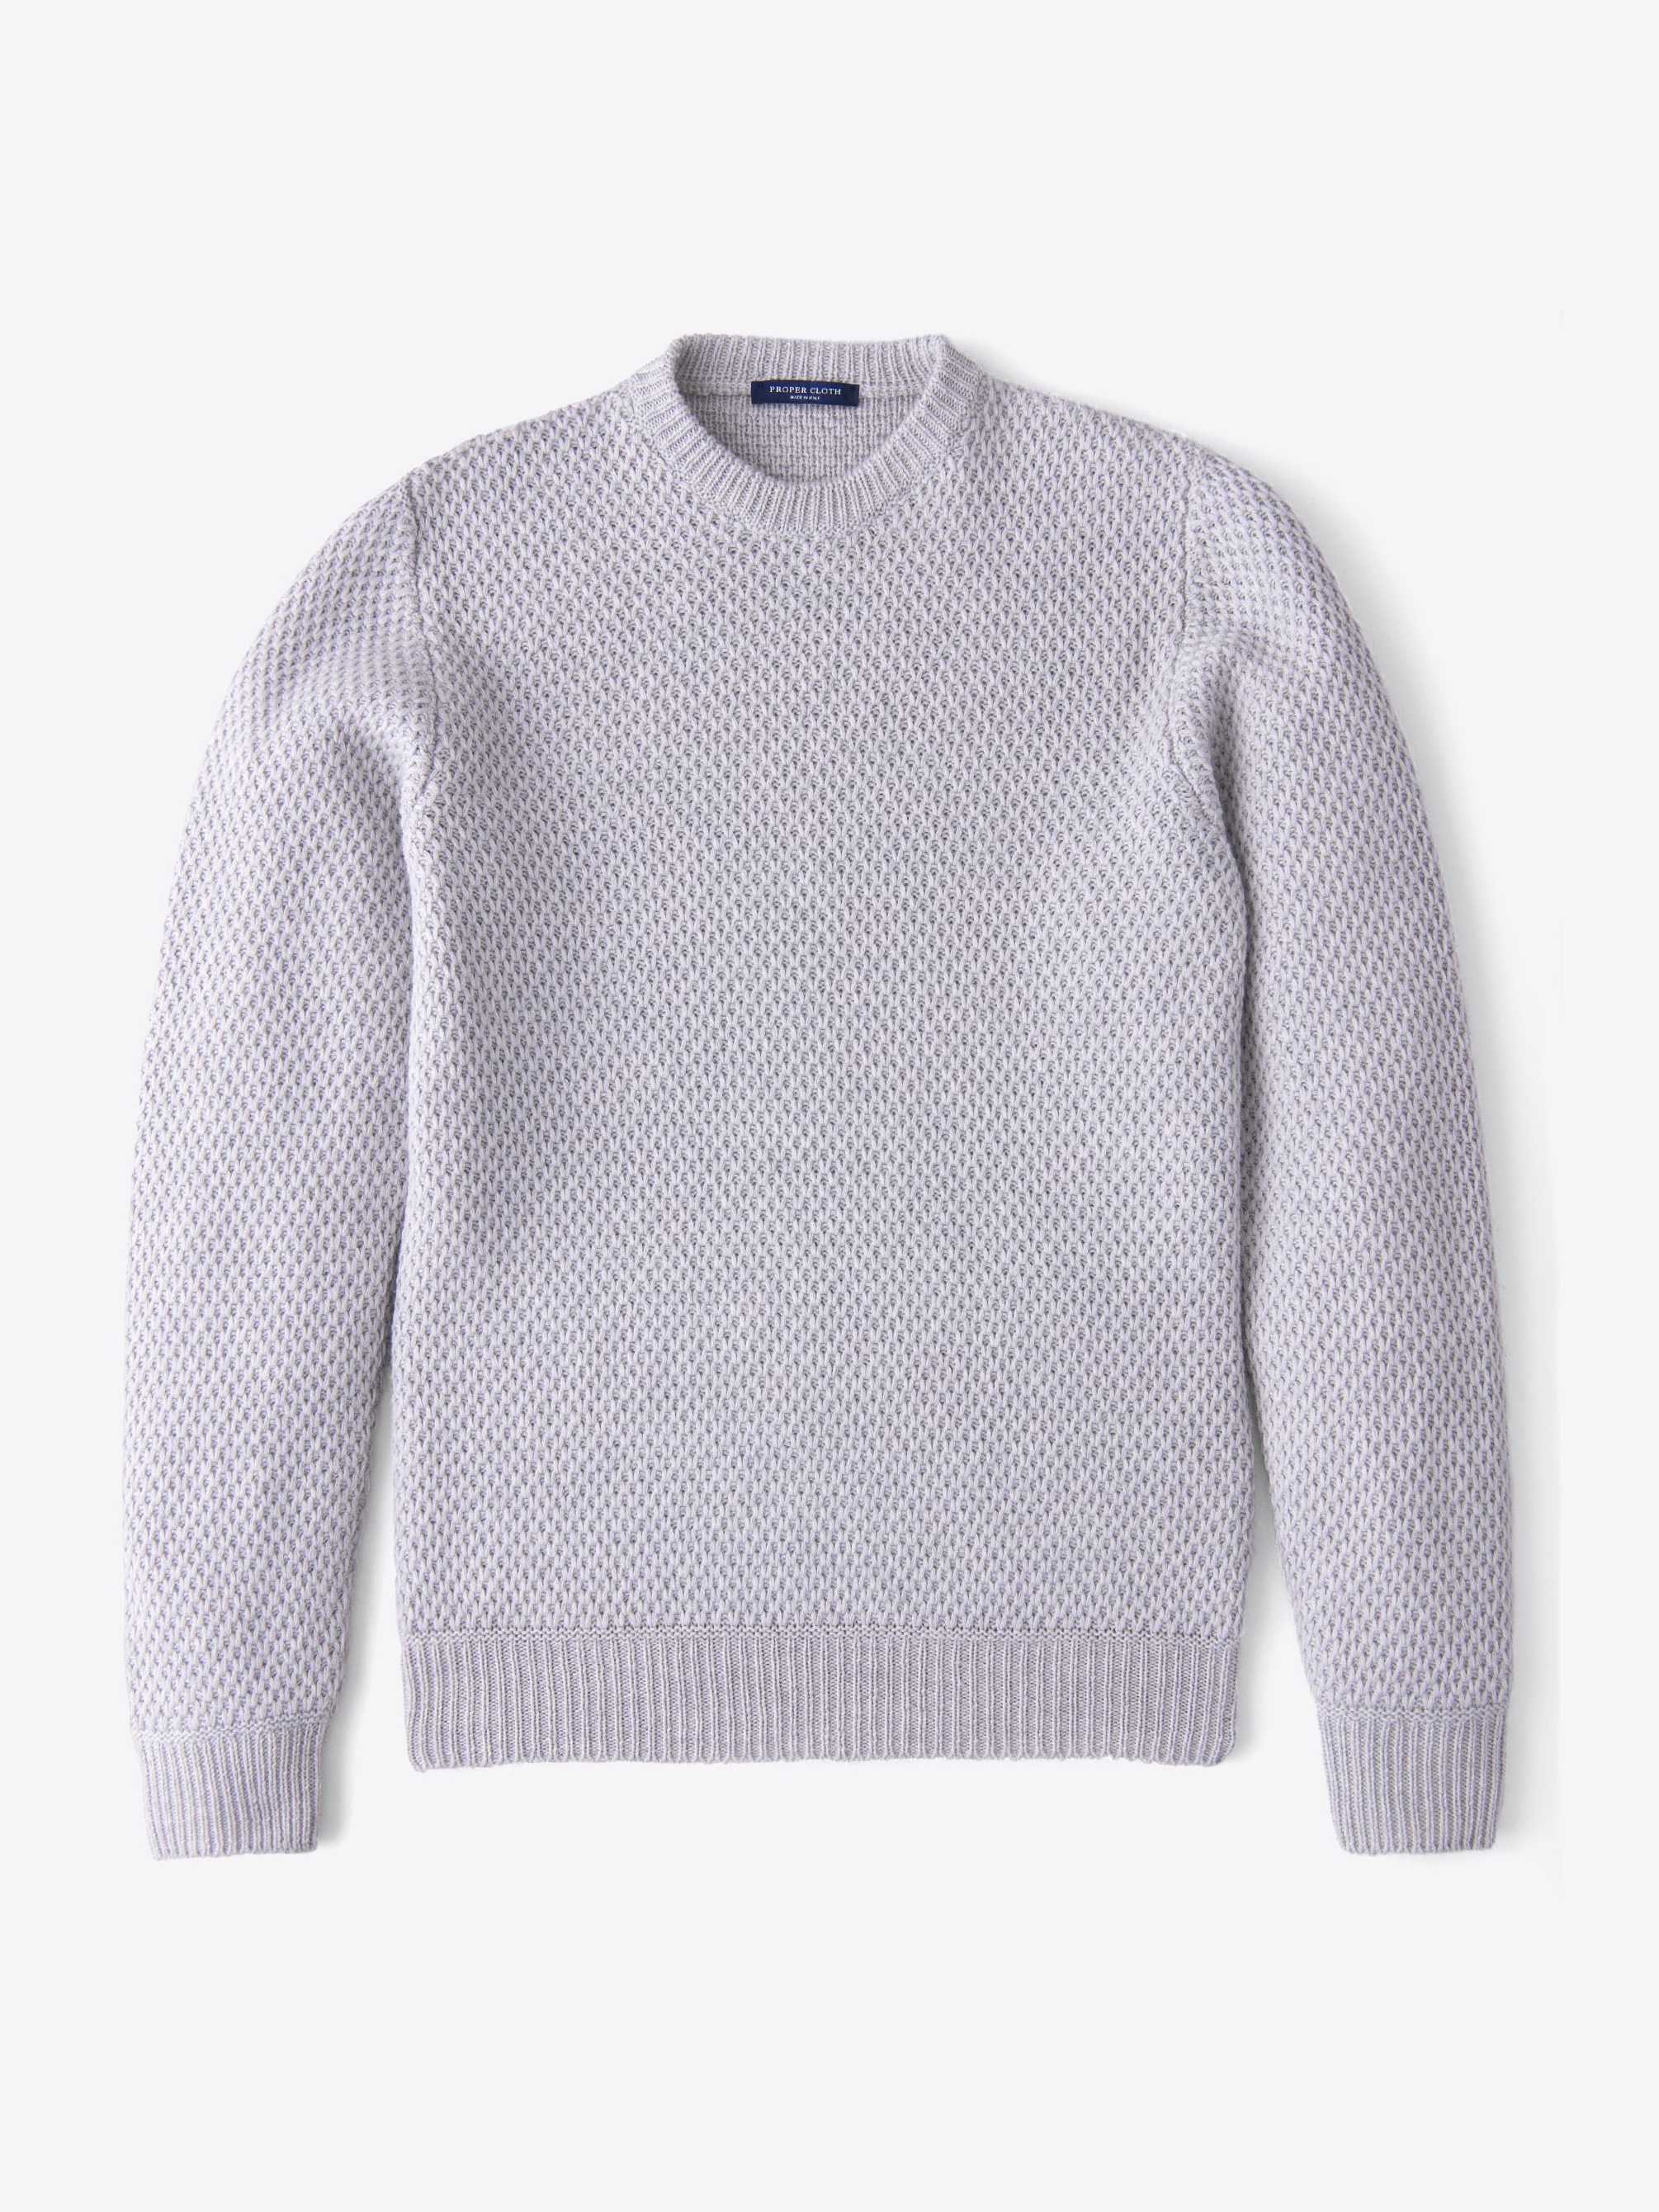 Zoom Image of Light Grey Wool and Cashmere Basket Stitch Sweater